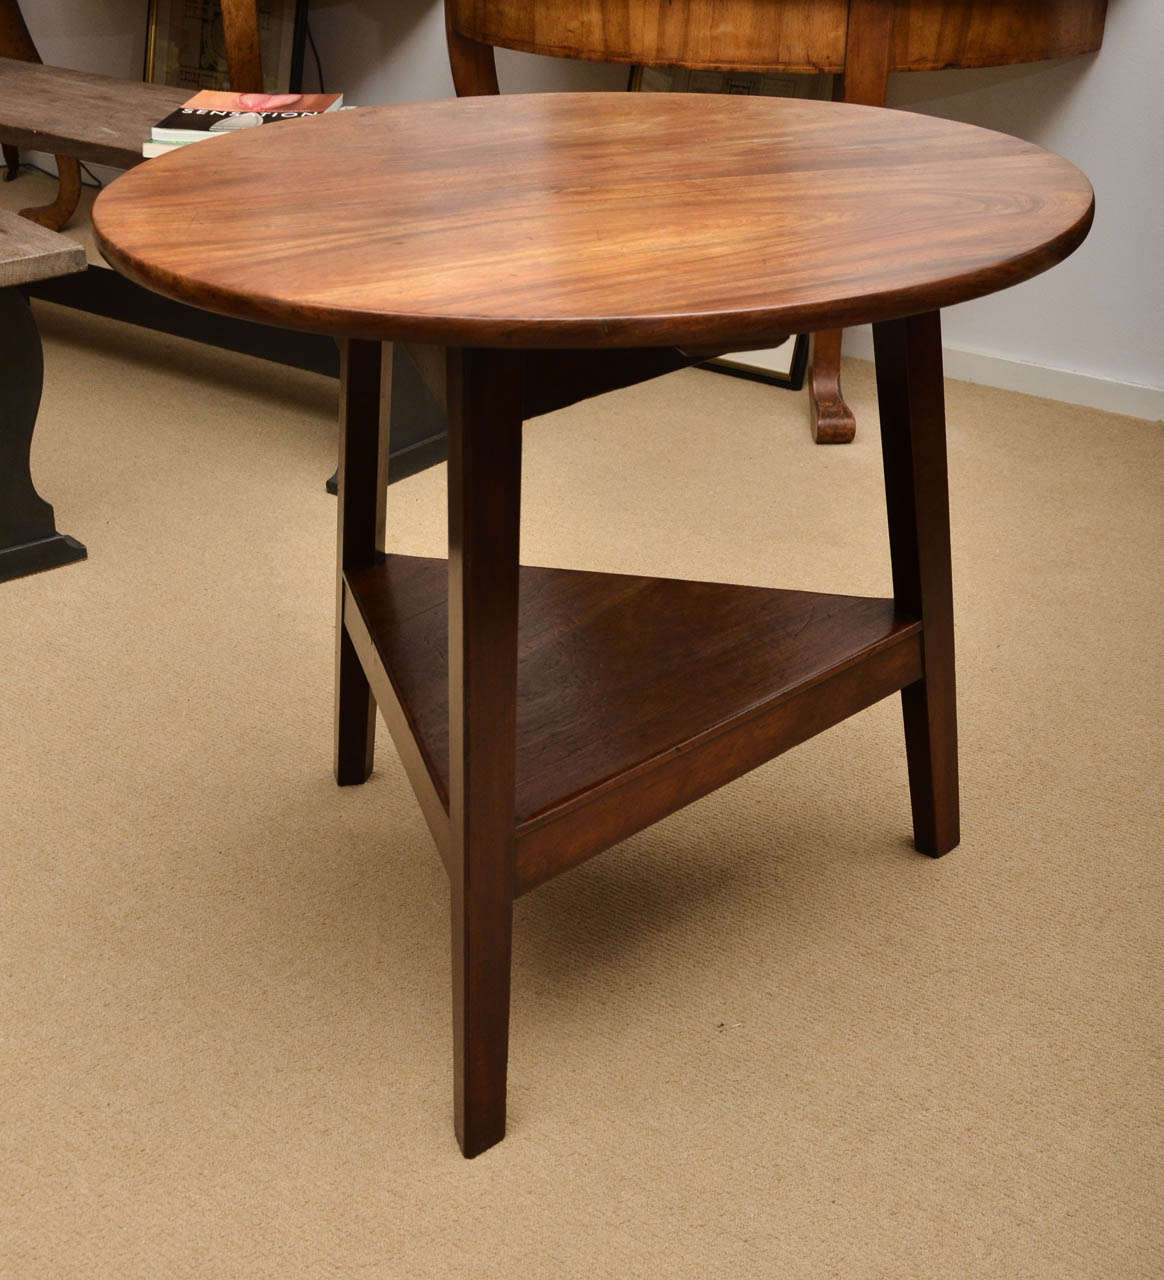 An early 19th century cricket side table, two-tiered, three-legged mahogany table.